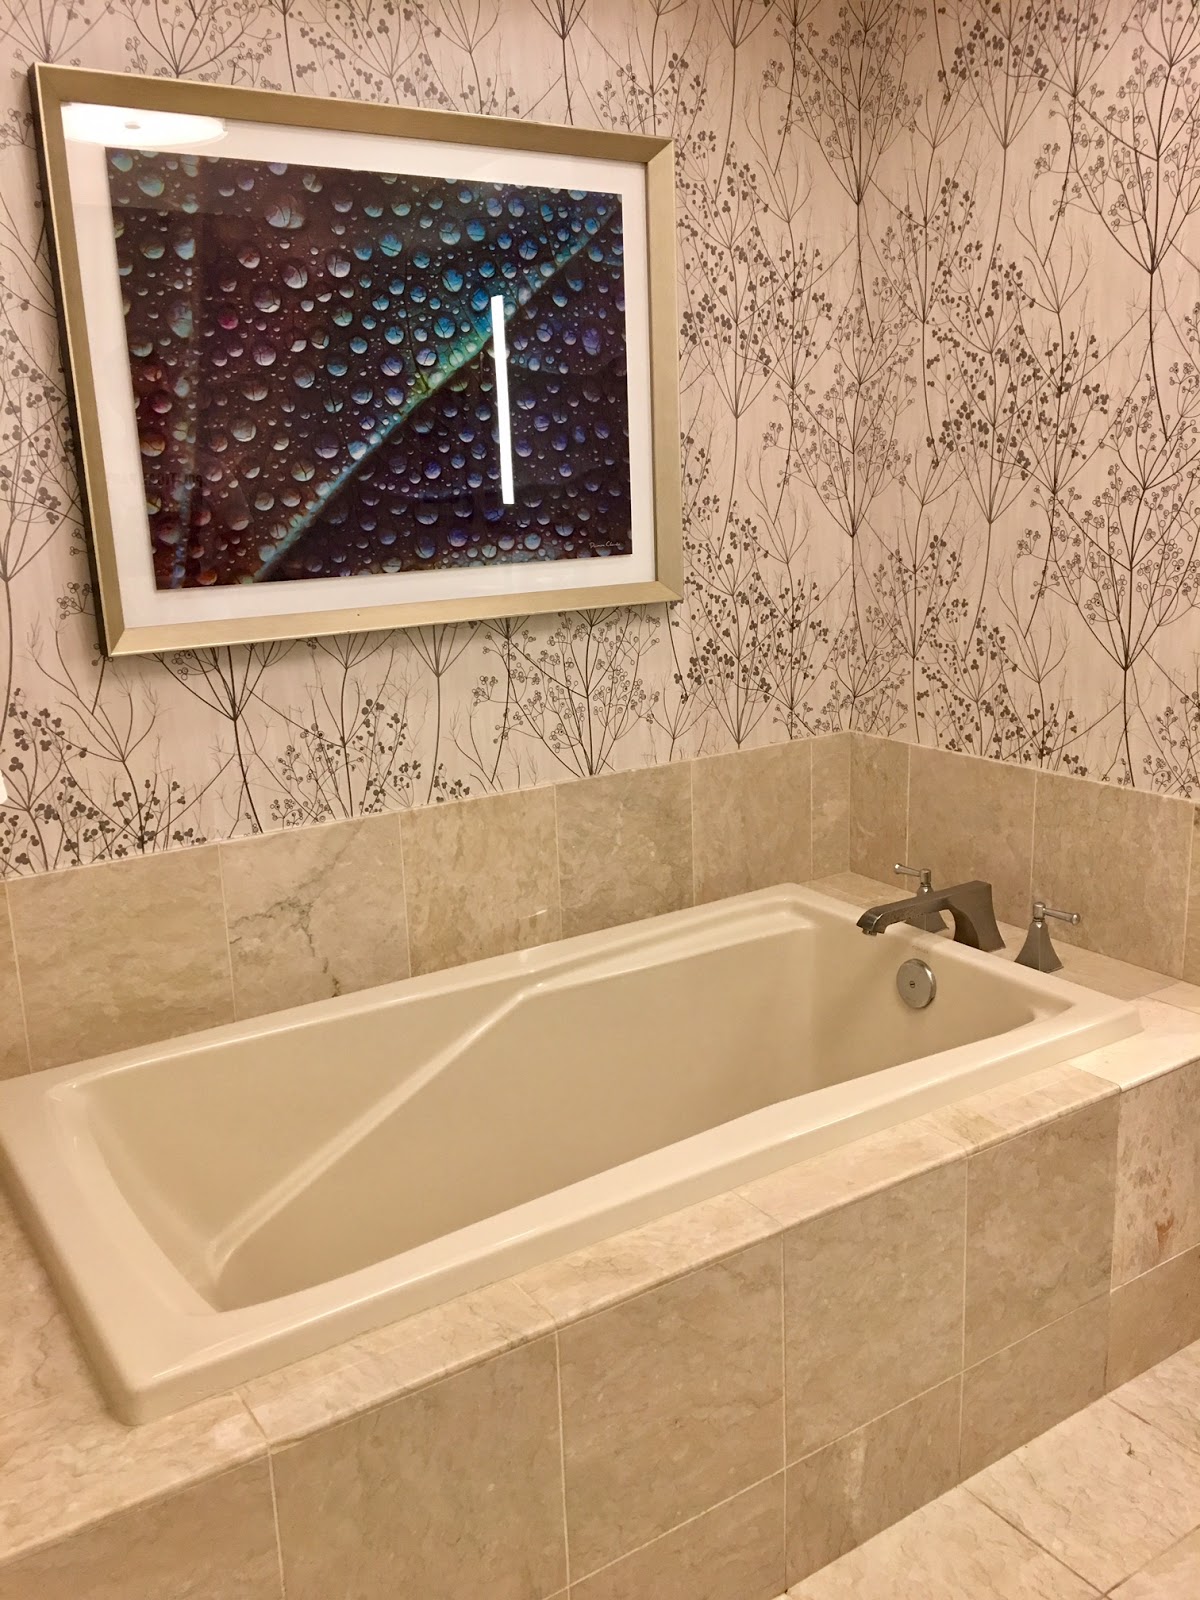 Bellagio Hotel Room Review